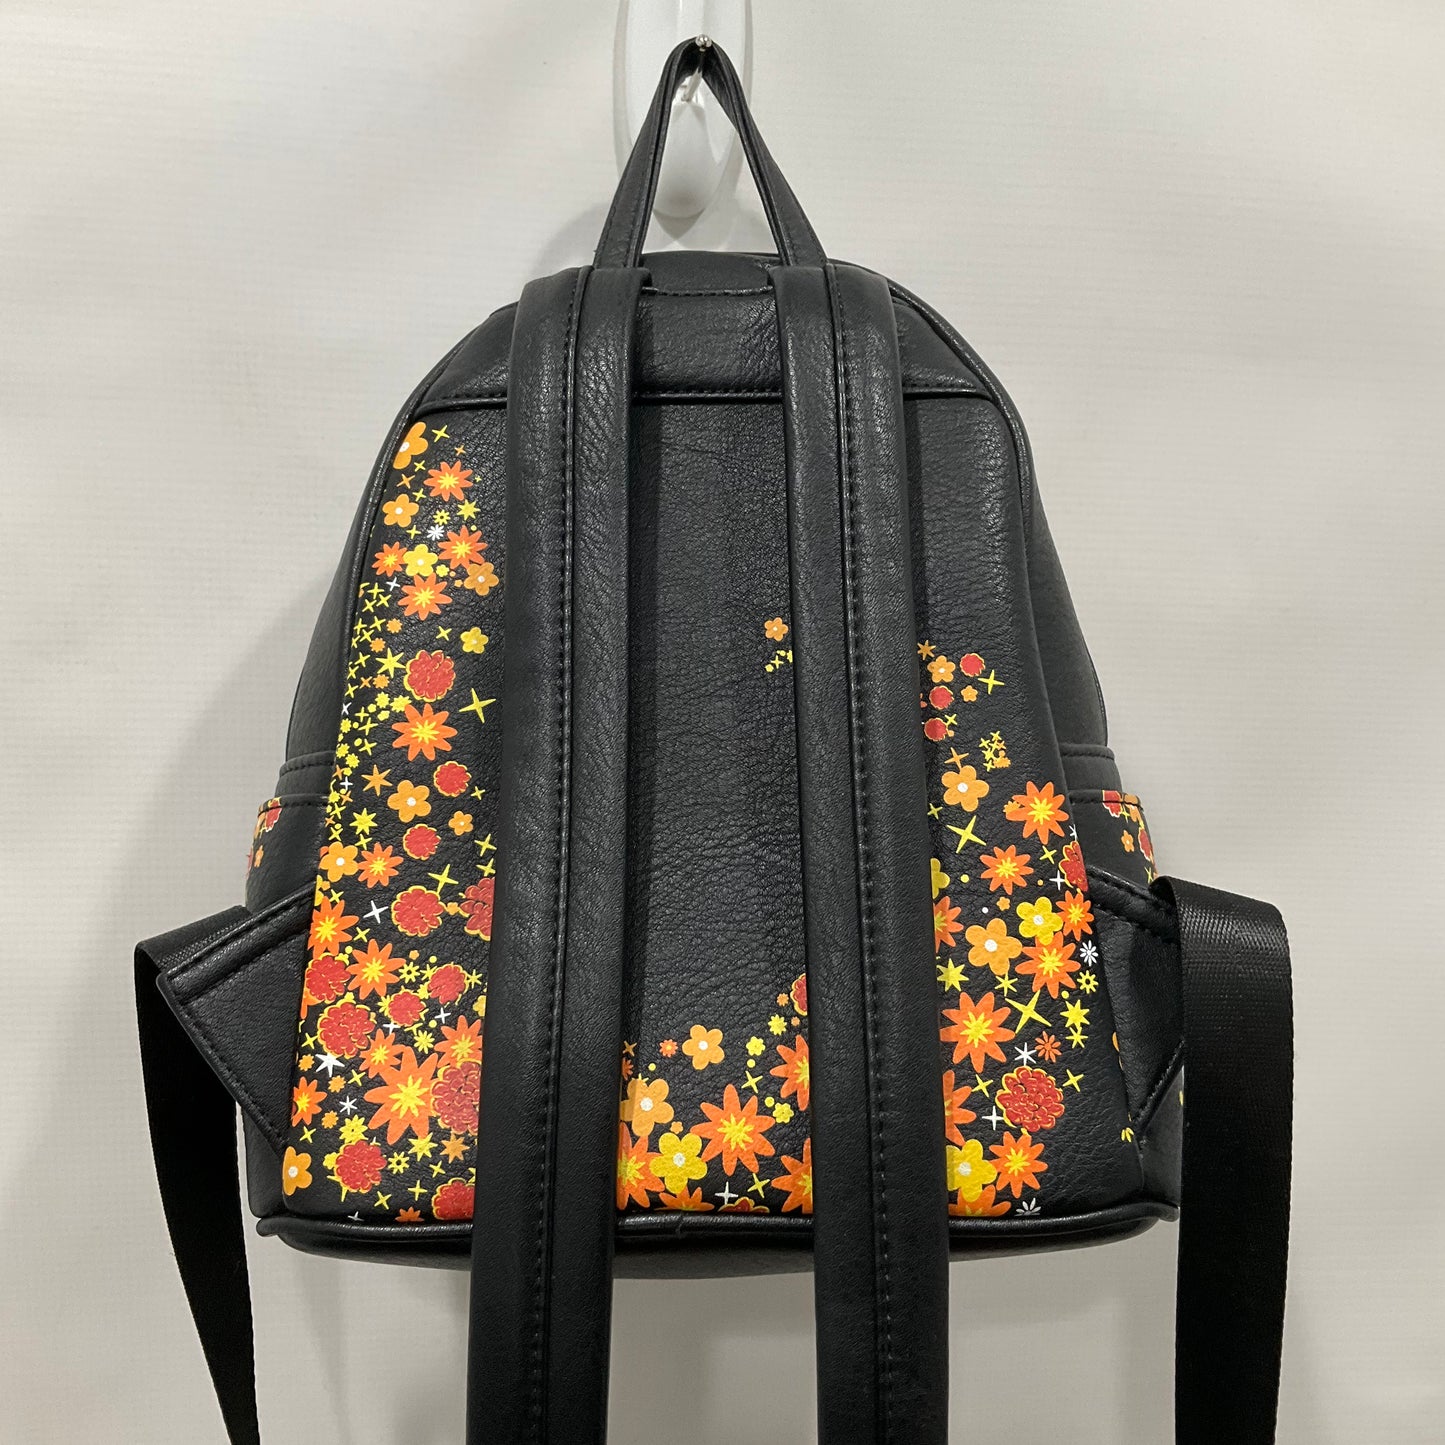 Backpack By loungefly  Size: Medium